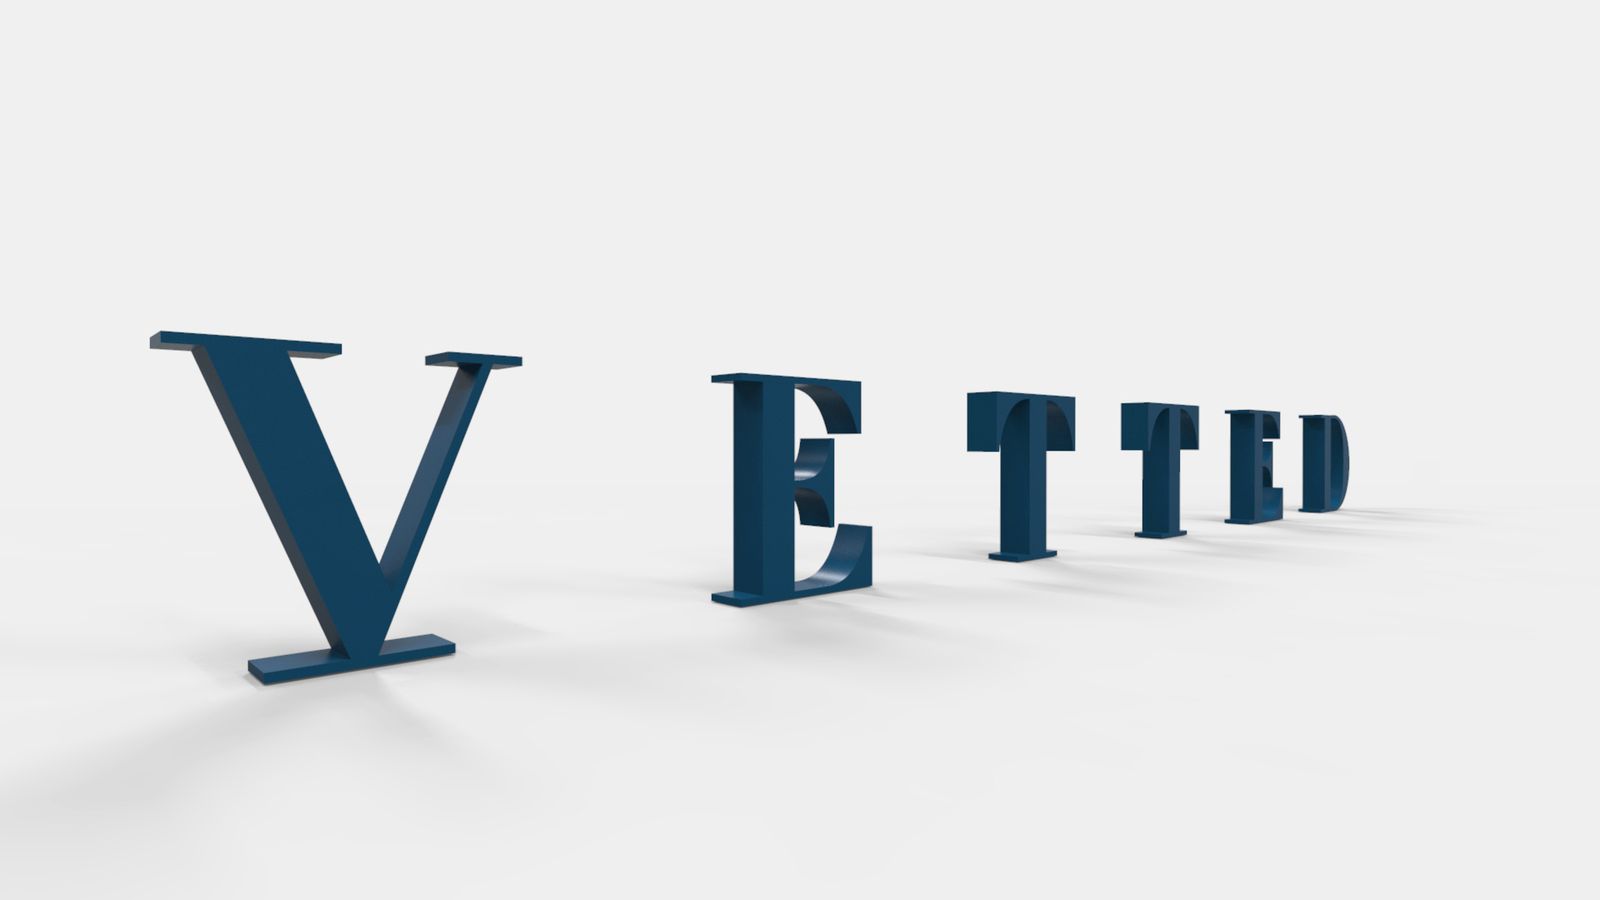 vetted large 3d letters